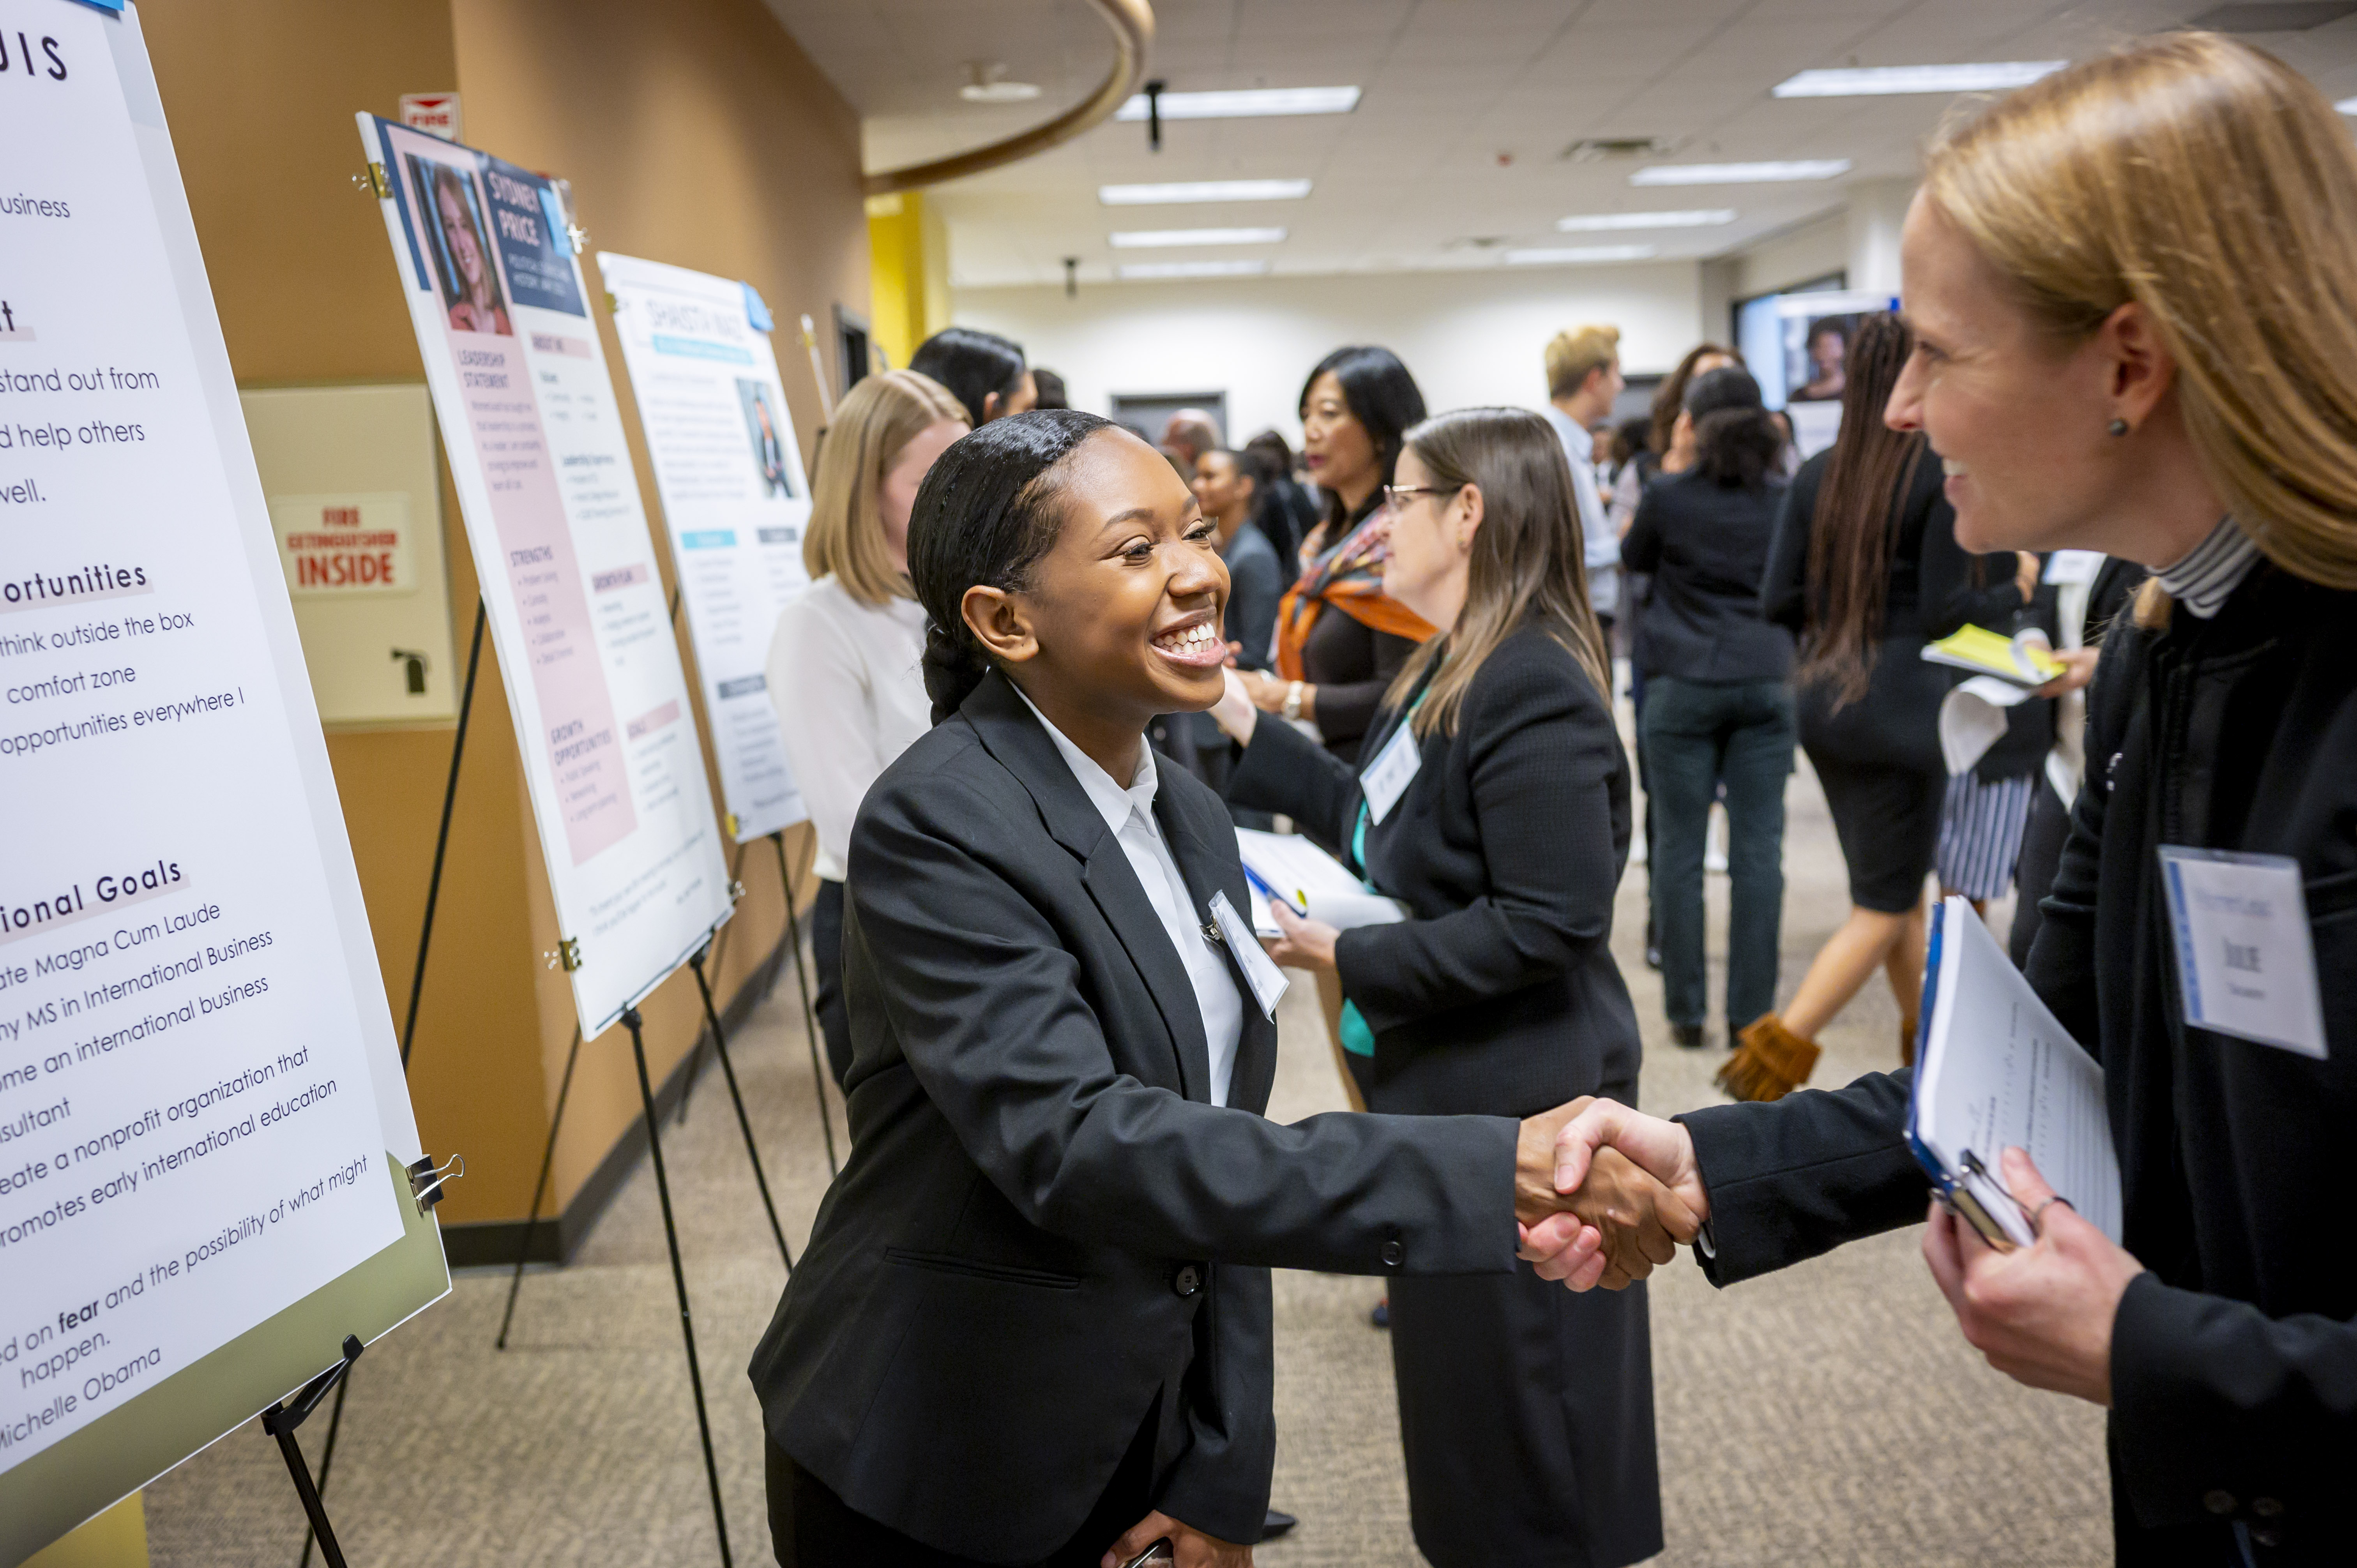 WomenLead students showcase their strategy and plans for the future during a poster presentation.